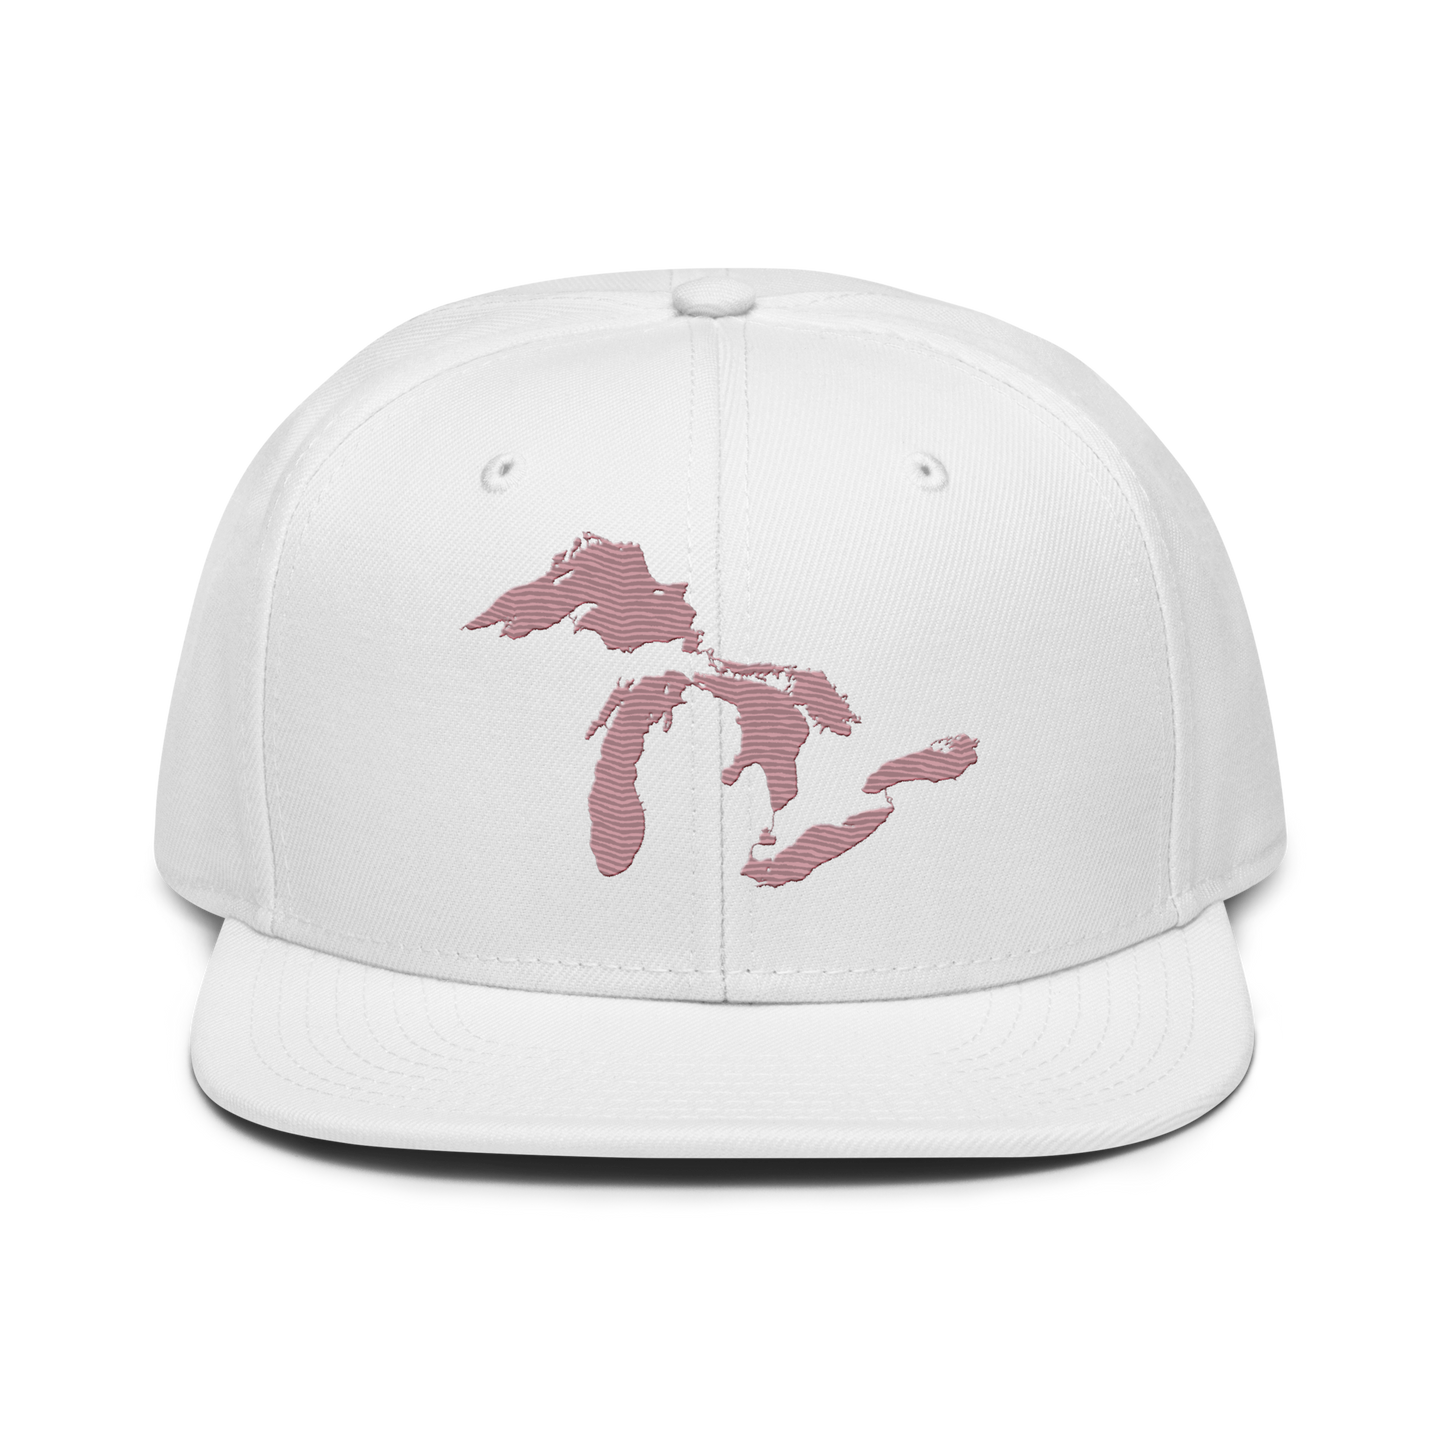 Great Lakes Snapback | 6-Panel - Cherry Blossom Pink